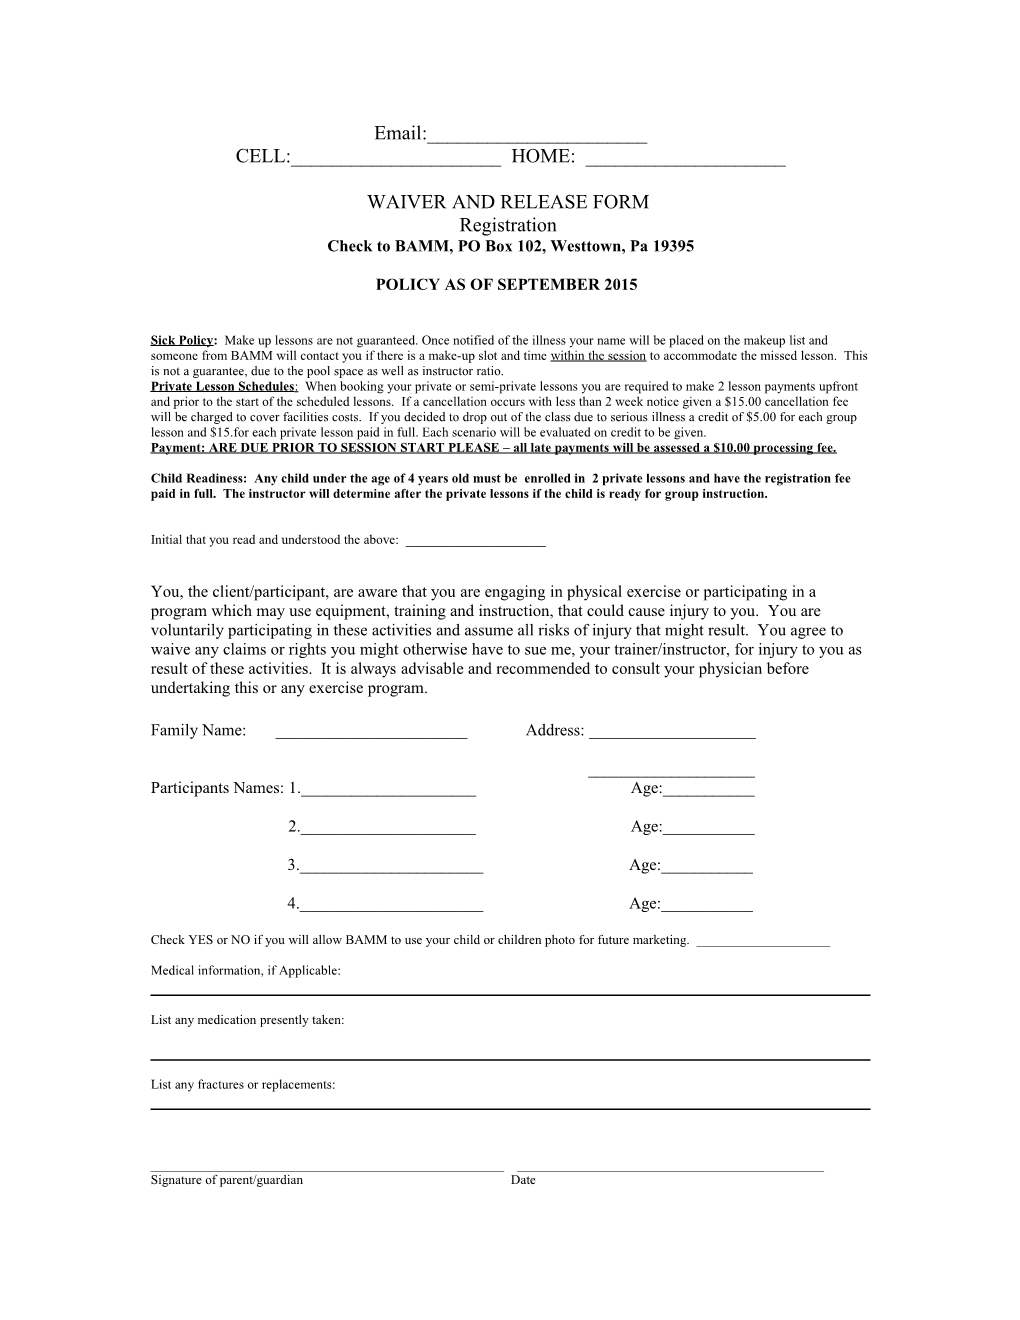 Waiver and Release Form